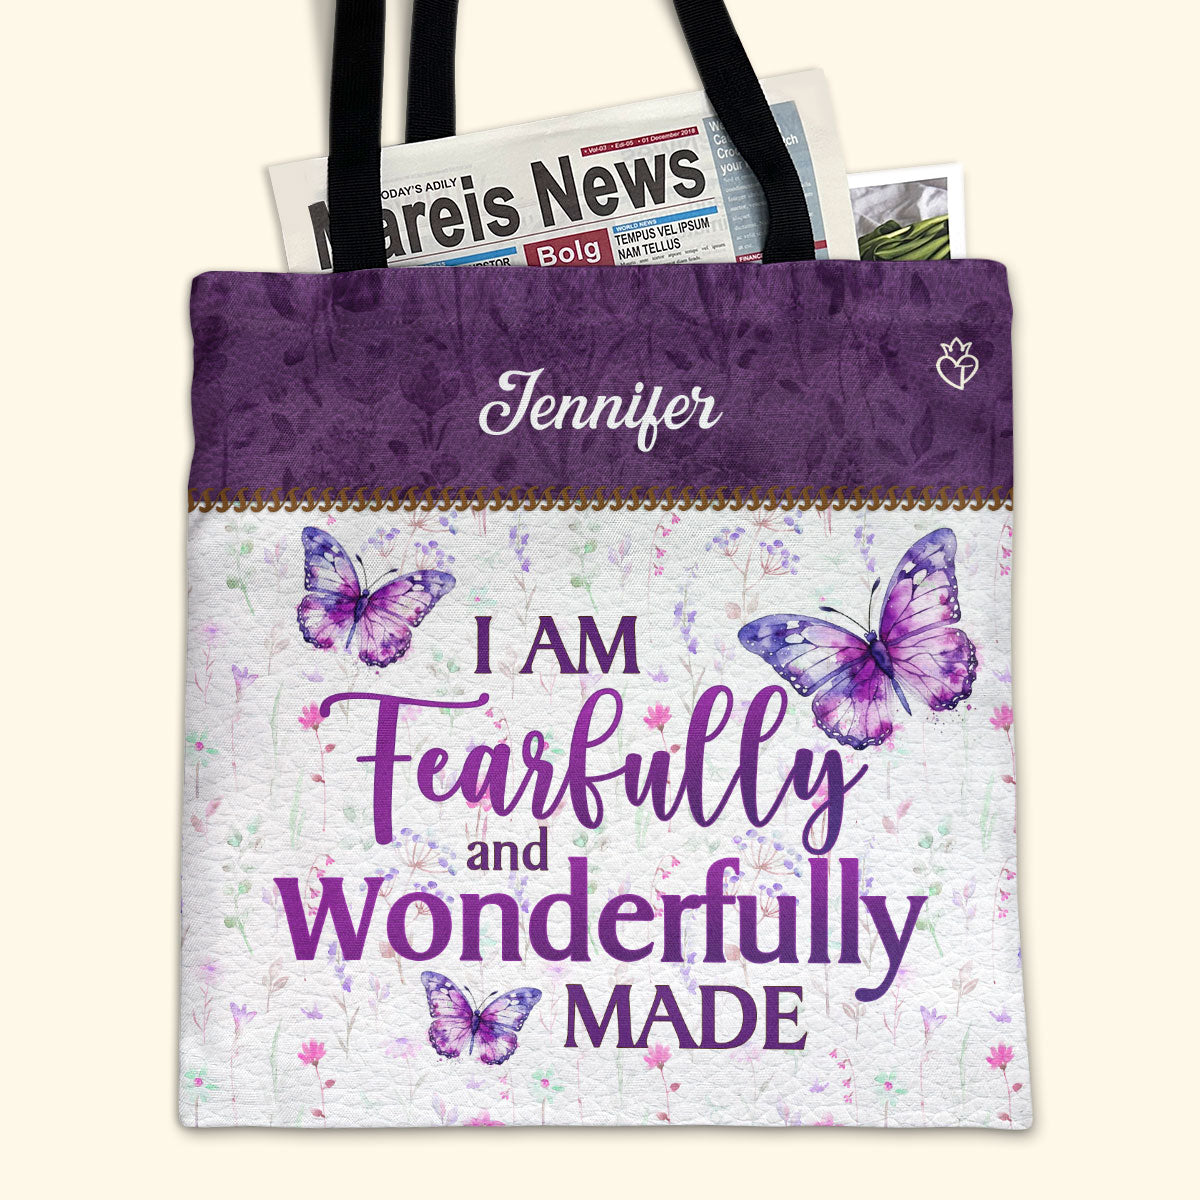 I Am Wonderfully Made - Personalized Tote Bag TCHN02